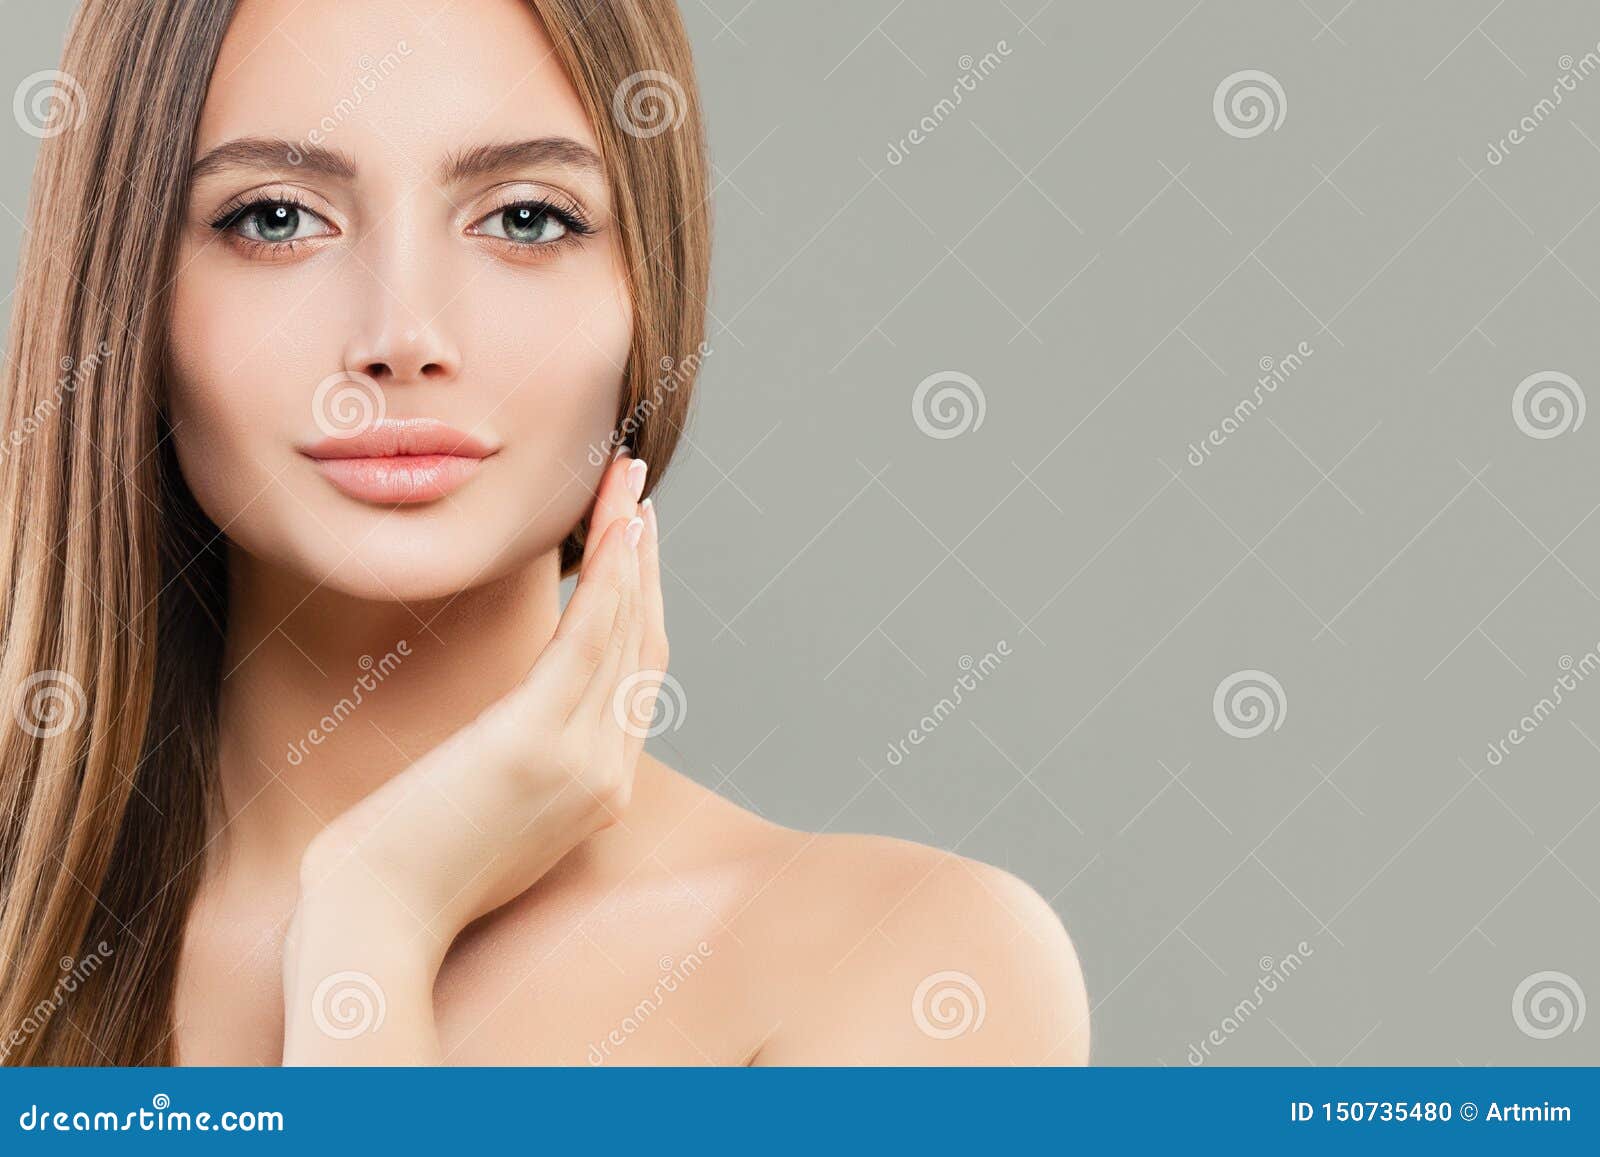 beautiful face closeup. healthy model woman with clear skin and healthy hair. skincare and facial treatment concept